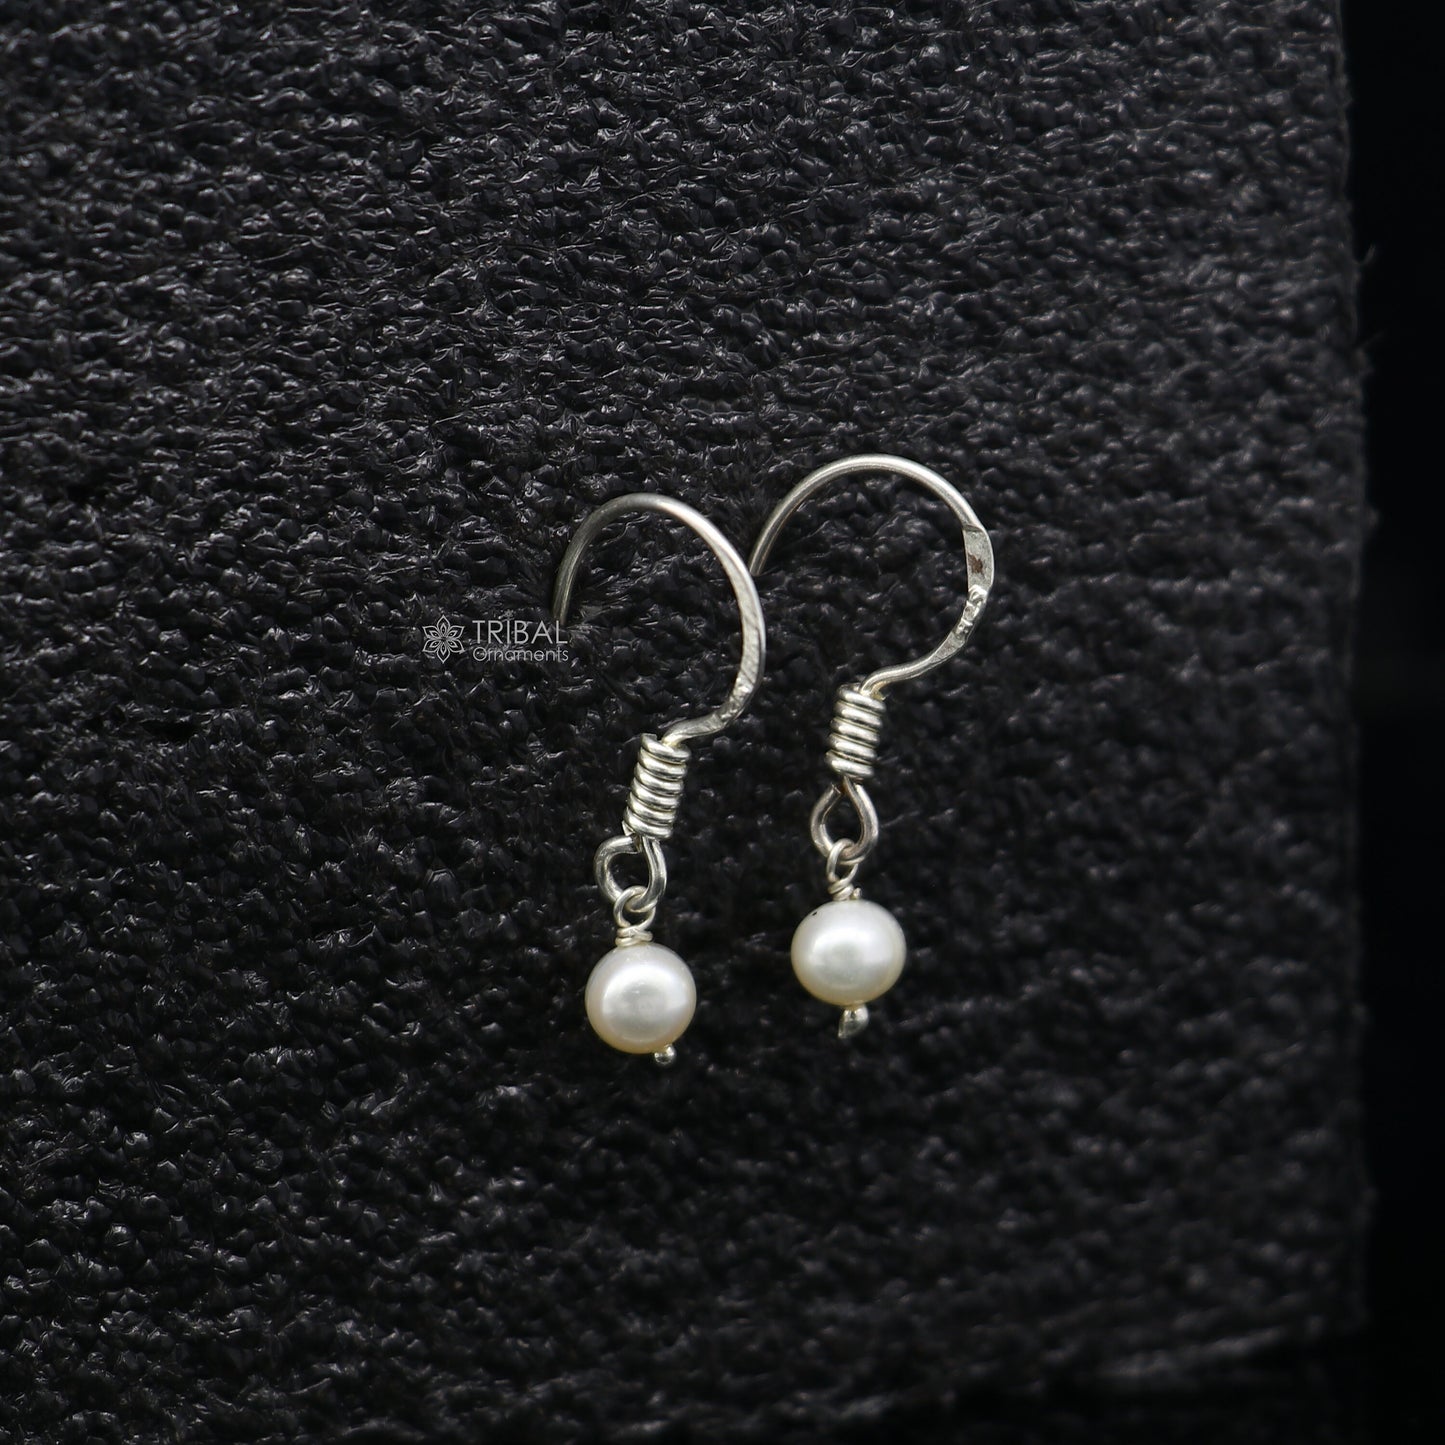 Unique 925 Sterling silver handmade fabulous Hoops earrings with gorgeous pearls stone stylish light weight delicate jewelry  s1209 - TRIBAL ORNAMENTS